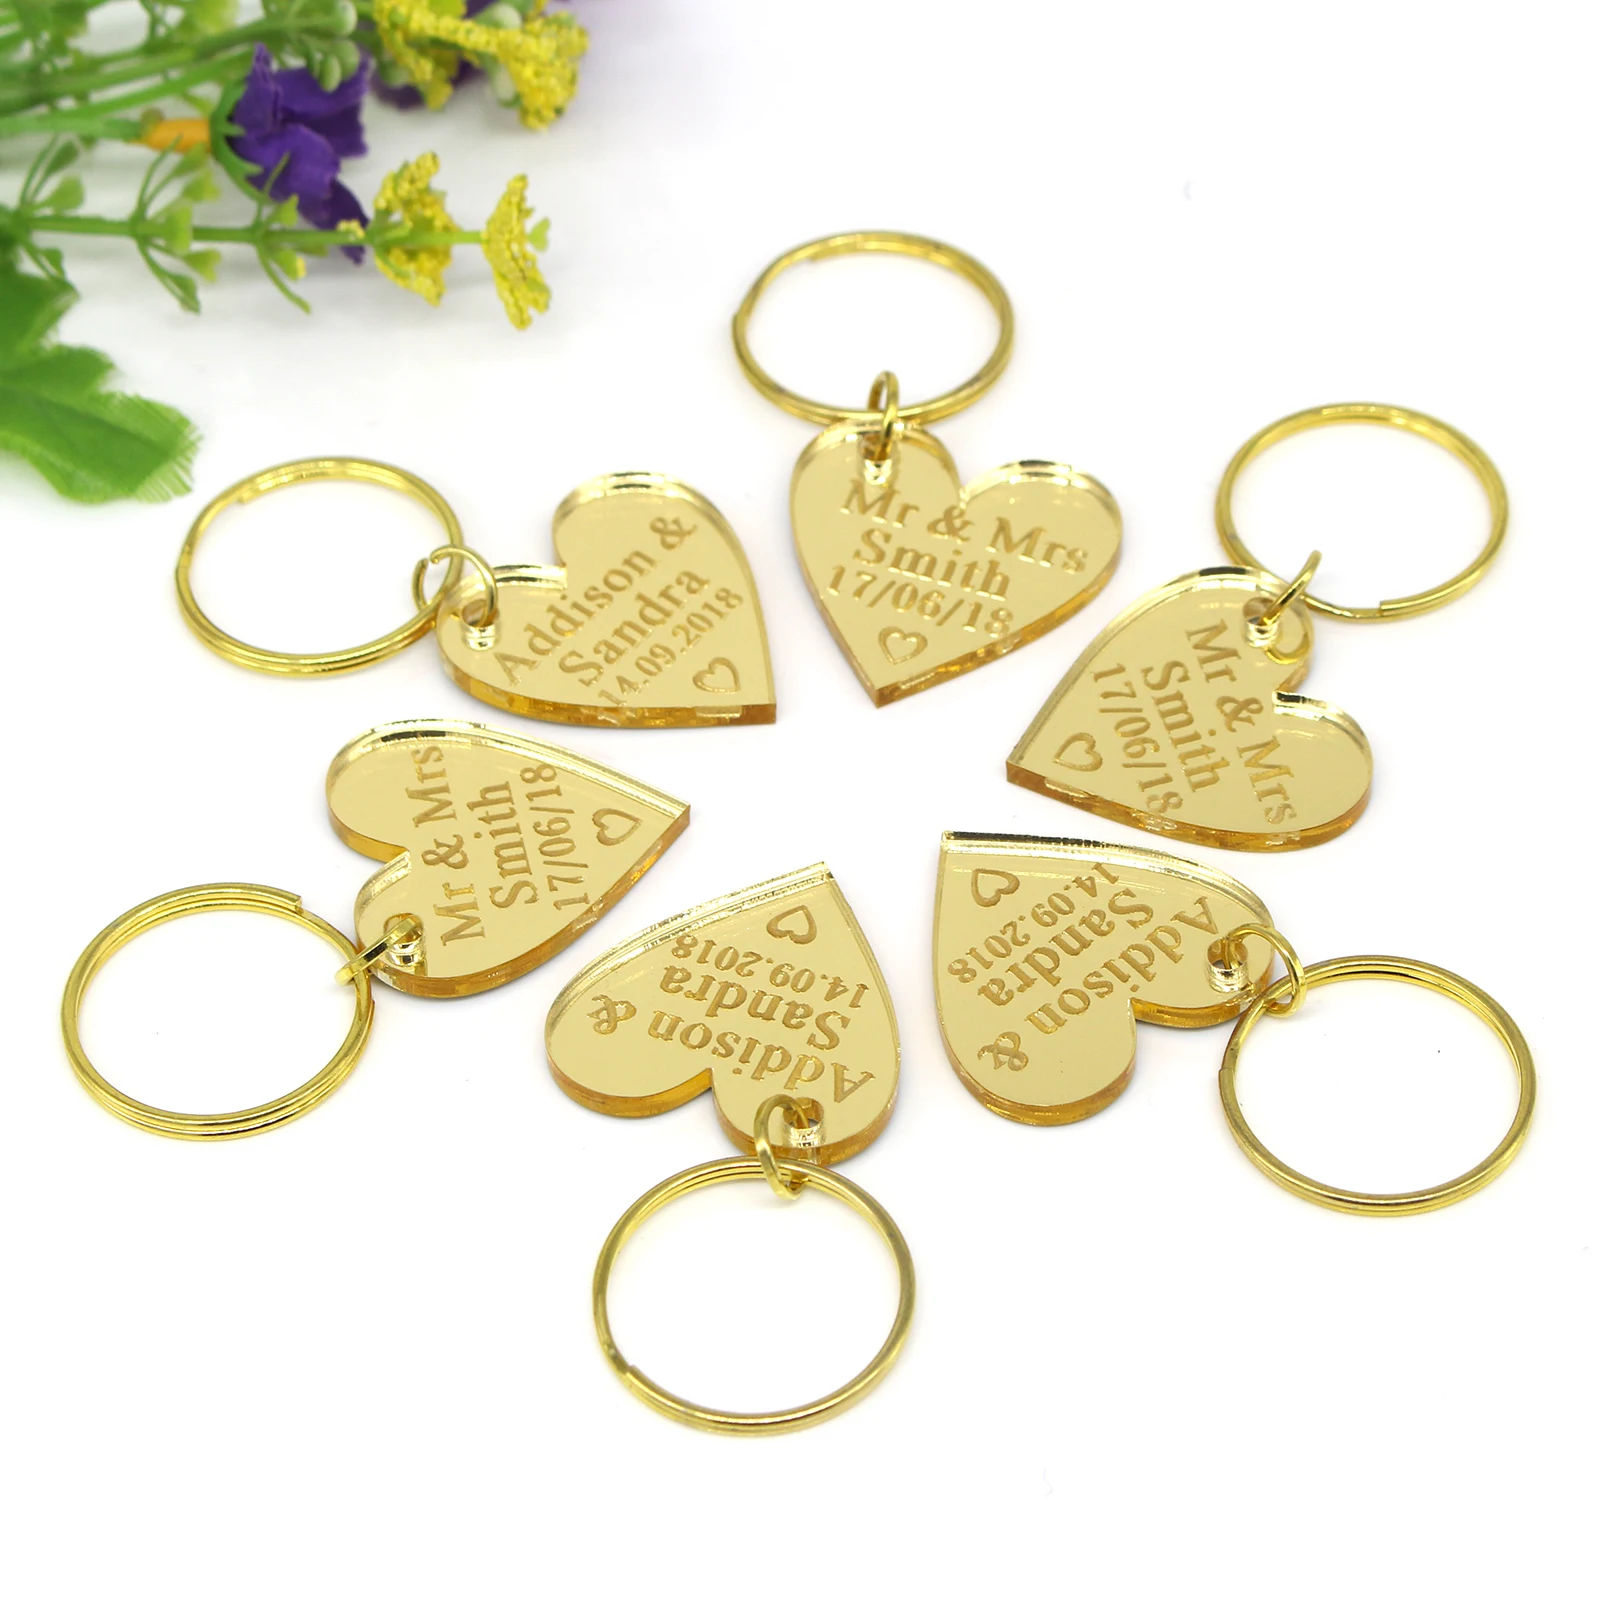 25 Personalized Gold/Silver/Clear/Mirror-engraved Keychains Love Wedding Party Baby Baptism Commemorative Gift Couple Souvenirs